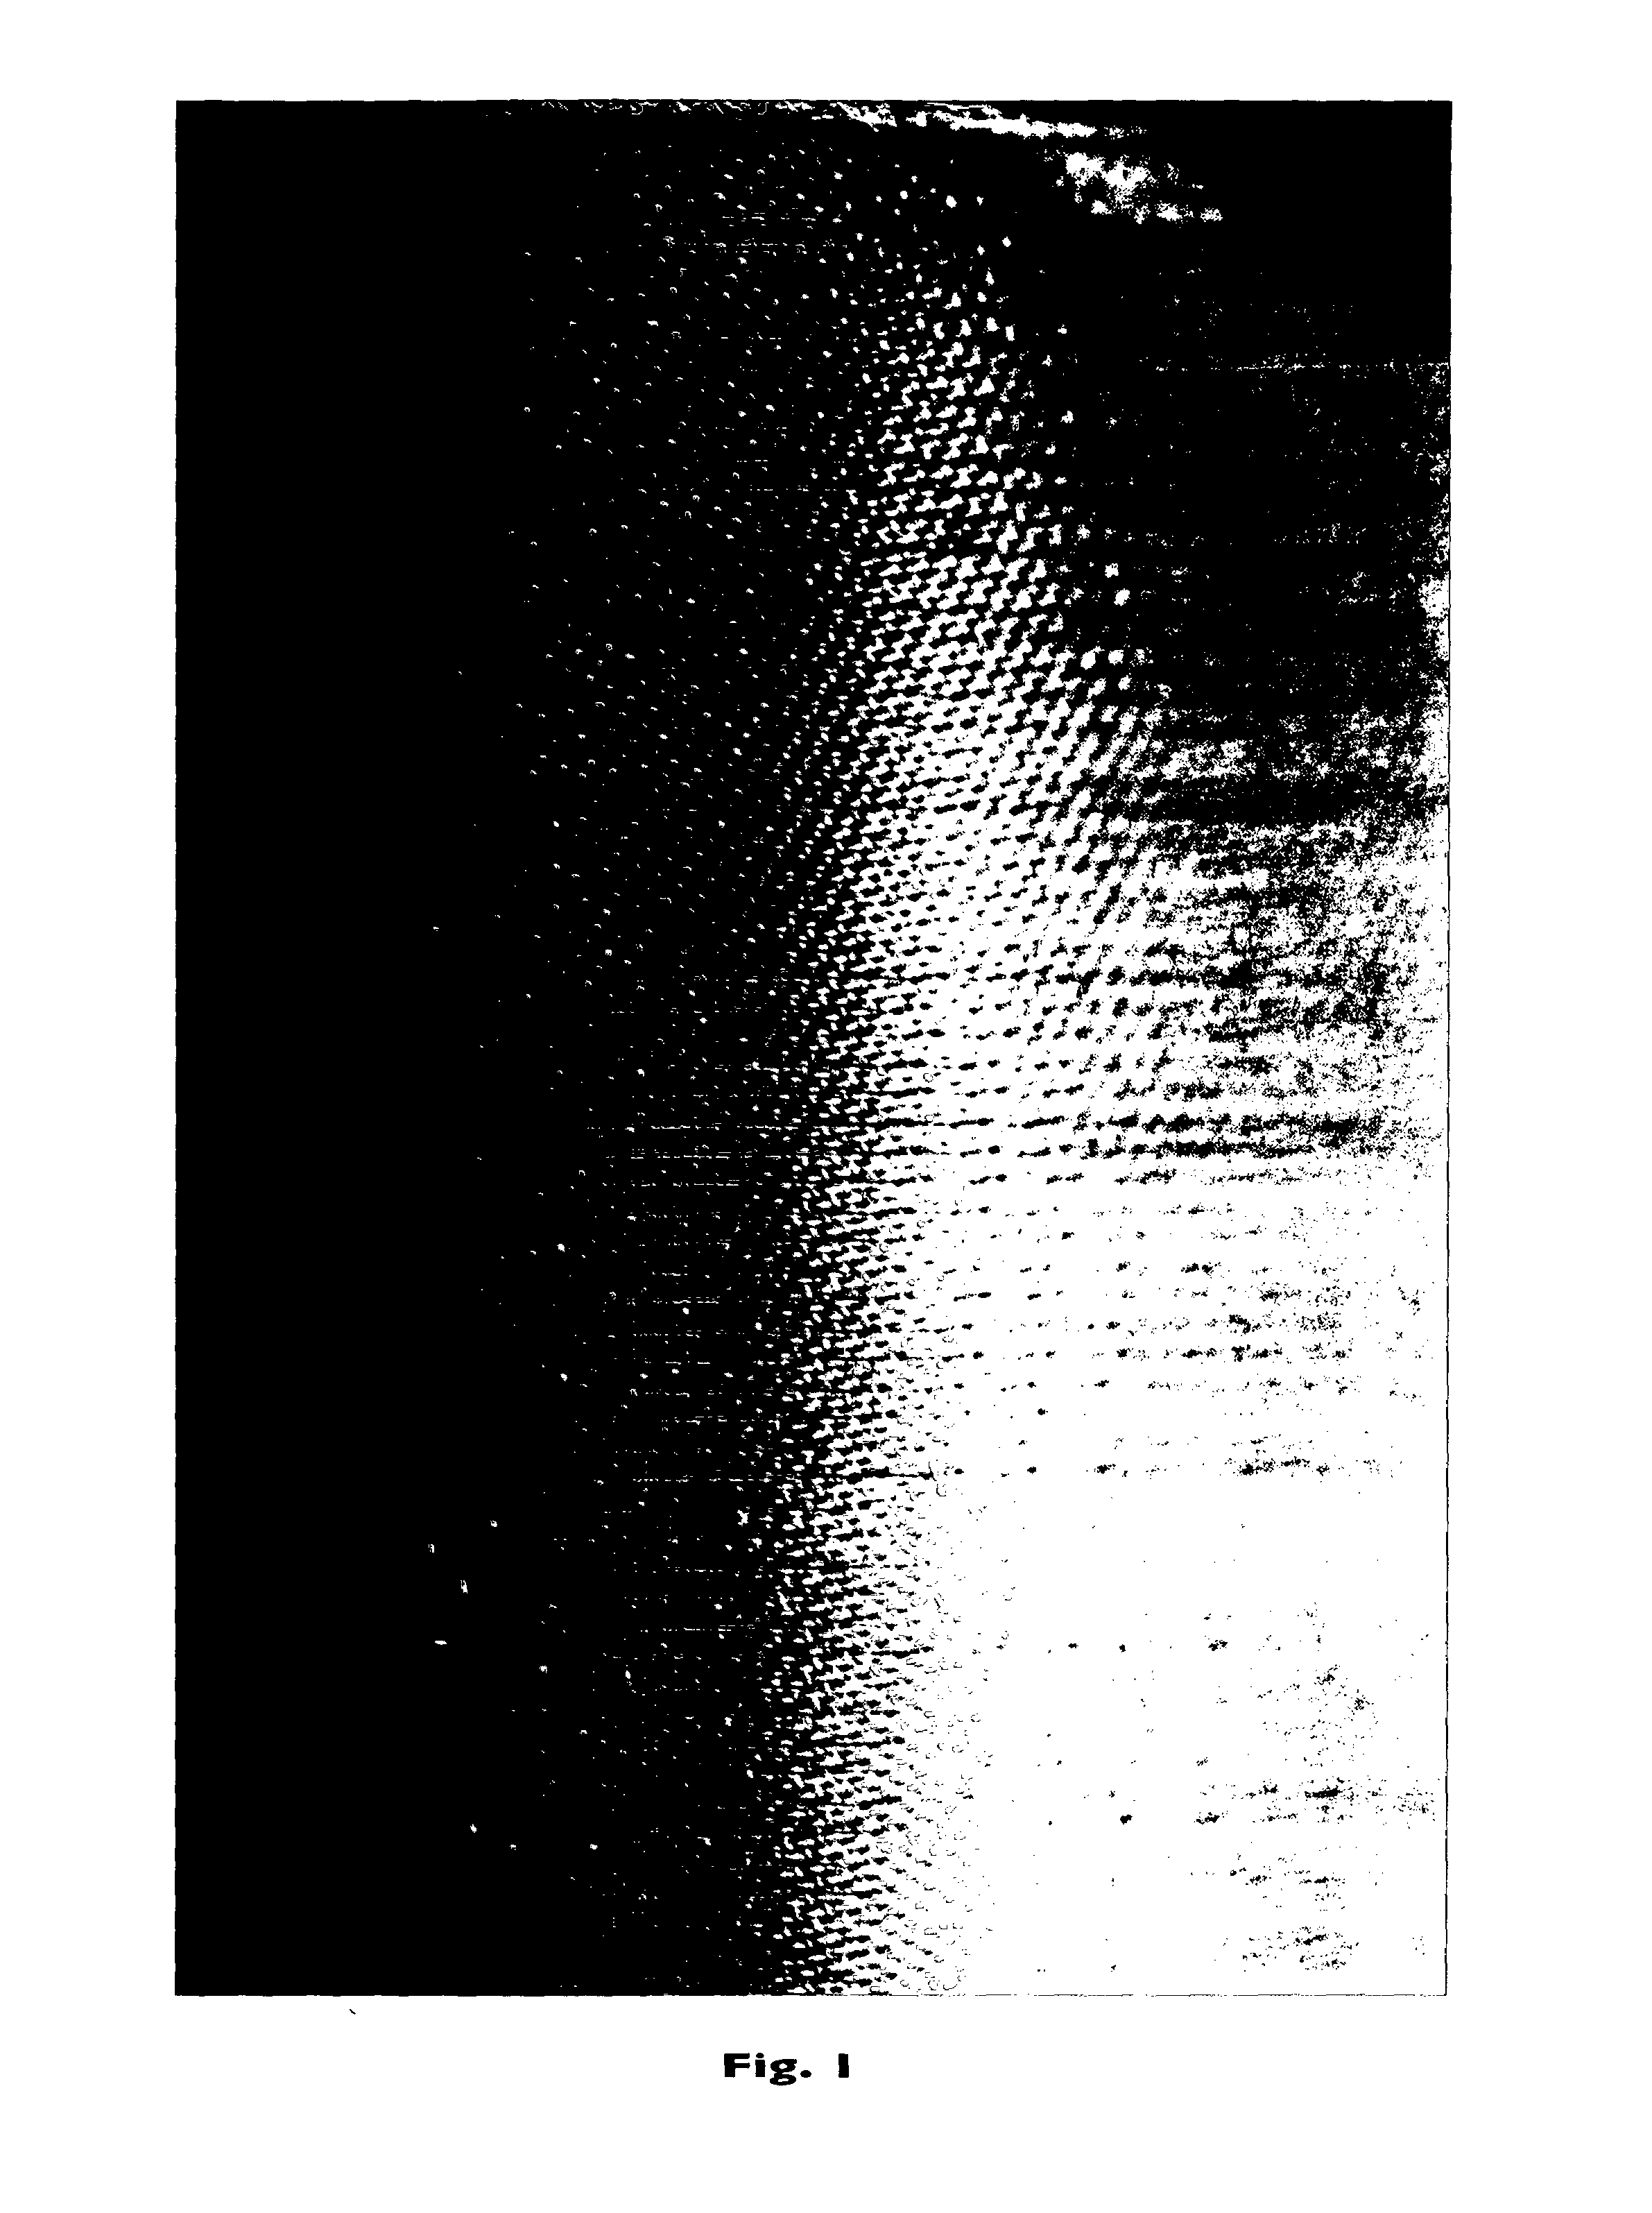 Method for treatment of spider silk-filament for use as thread or a composition in the manufacture of cosmetic, medical, textile or industrial applications such as bio-artificial cell tissue or skin based on (recombinant) spider silk